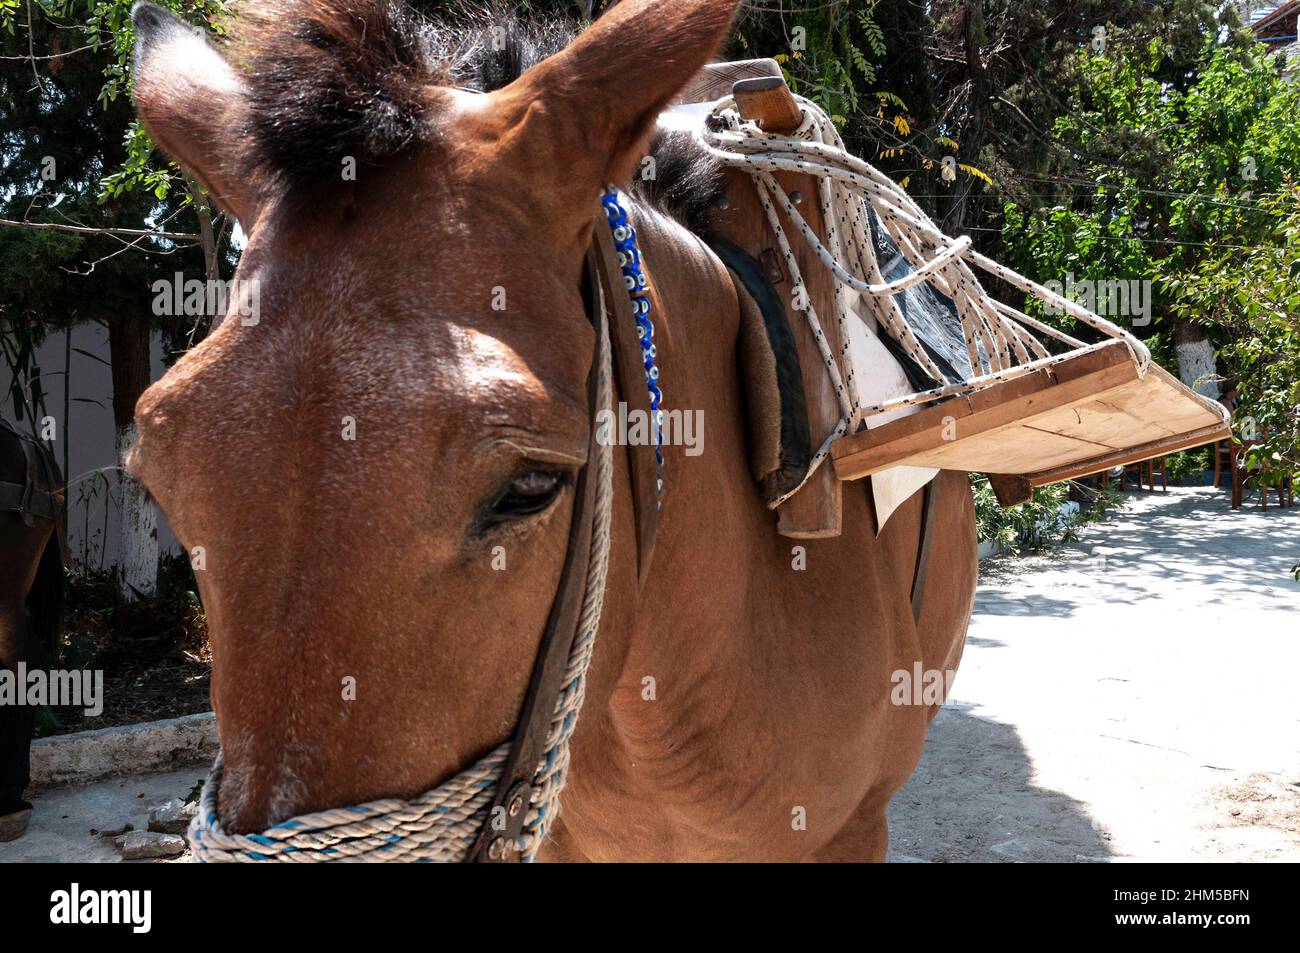 Mule used as the means of transporting luggage and refuse around the old town of Alonissos, Greek Islands,Greece, EU Stock Photo